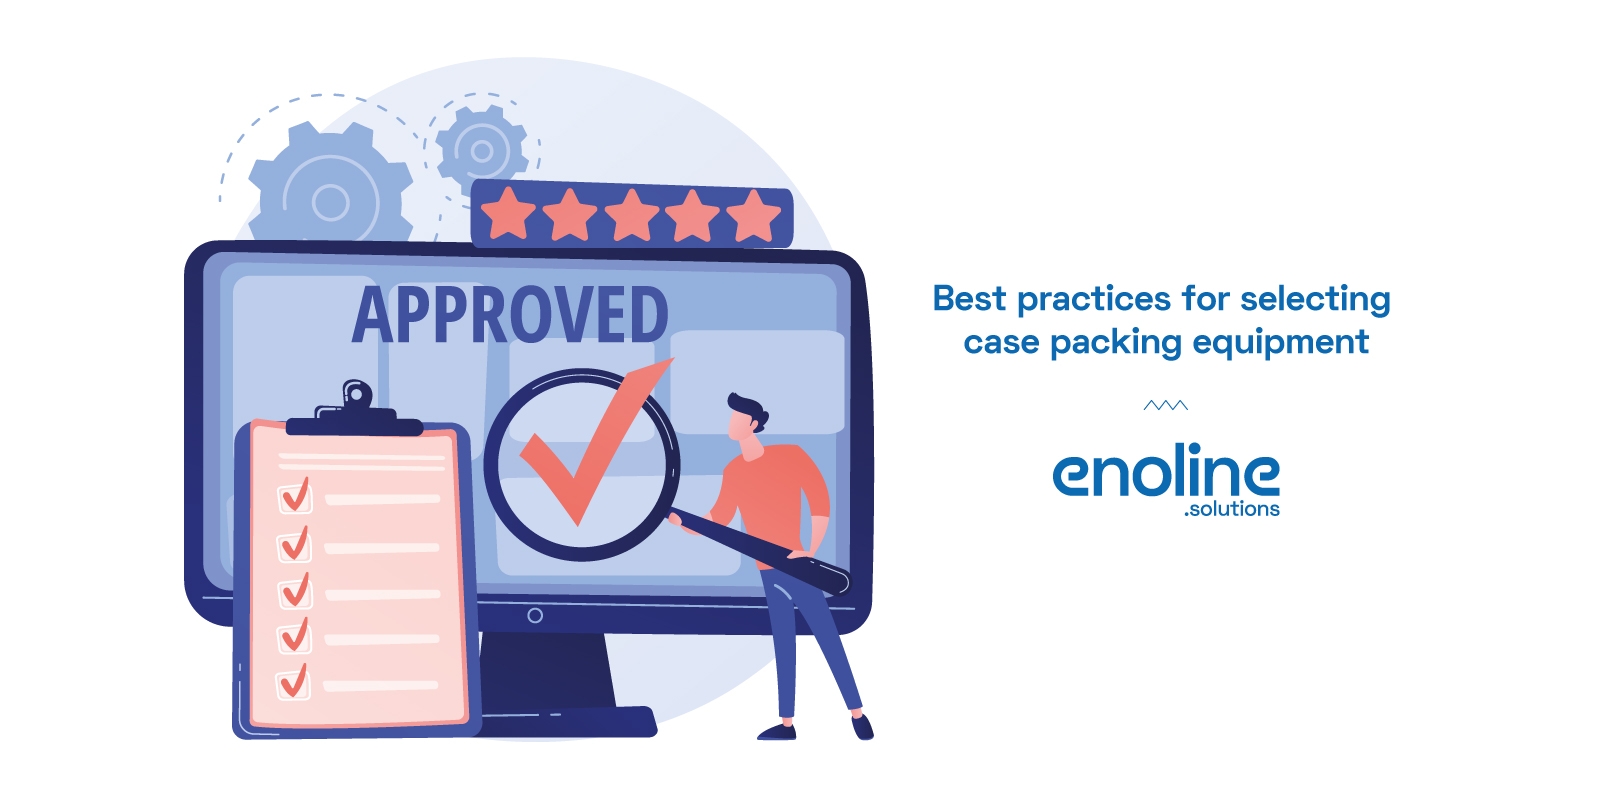 Best practices for selecting case packing equipment enoline solutions